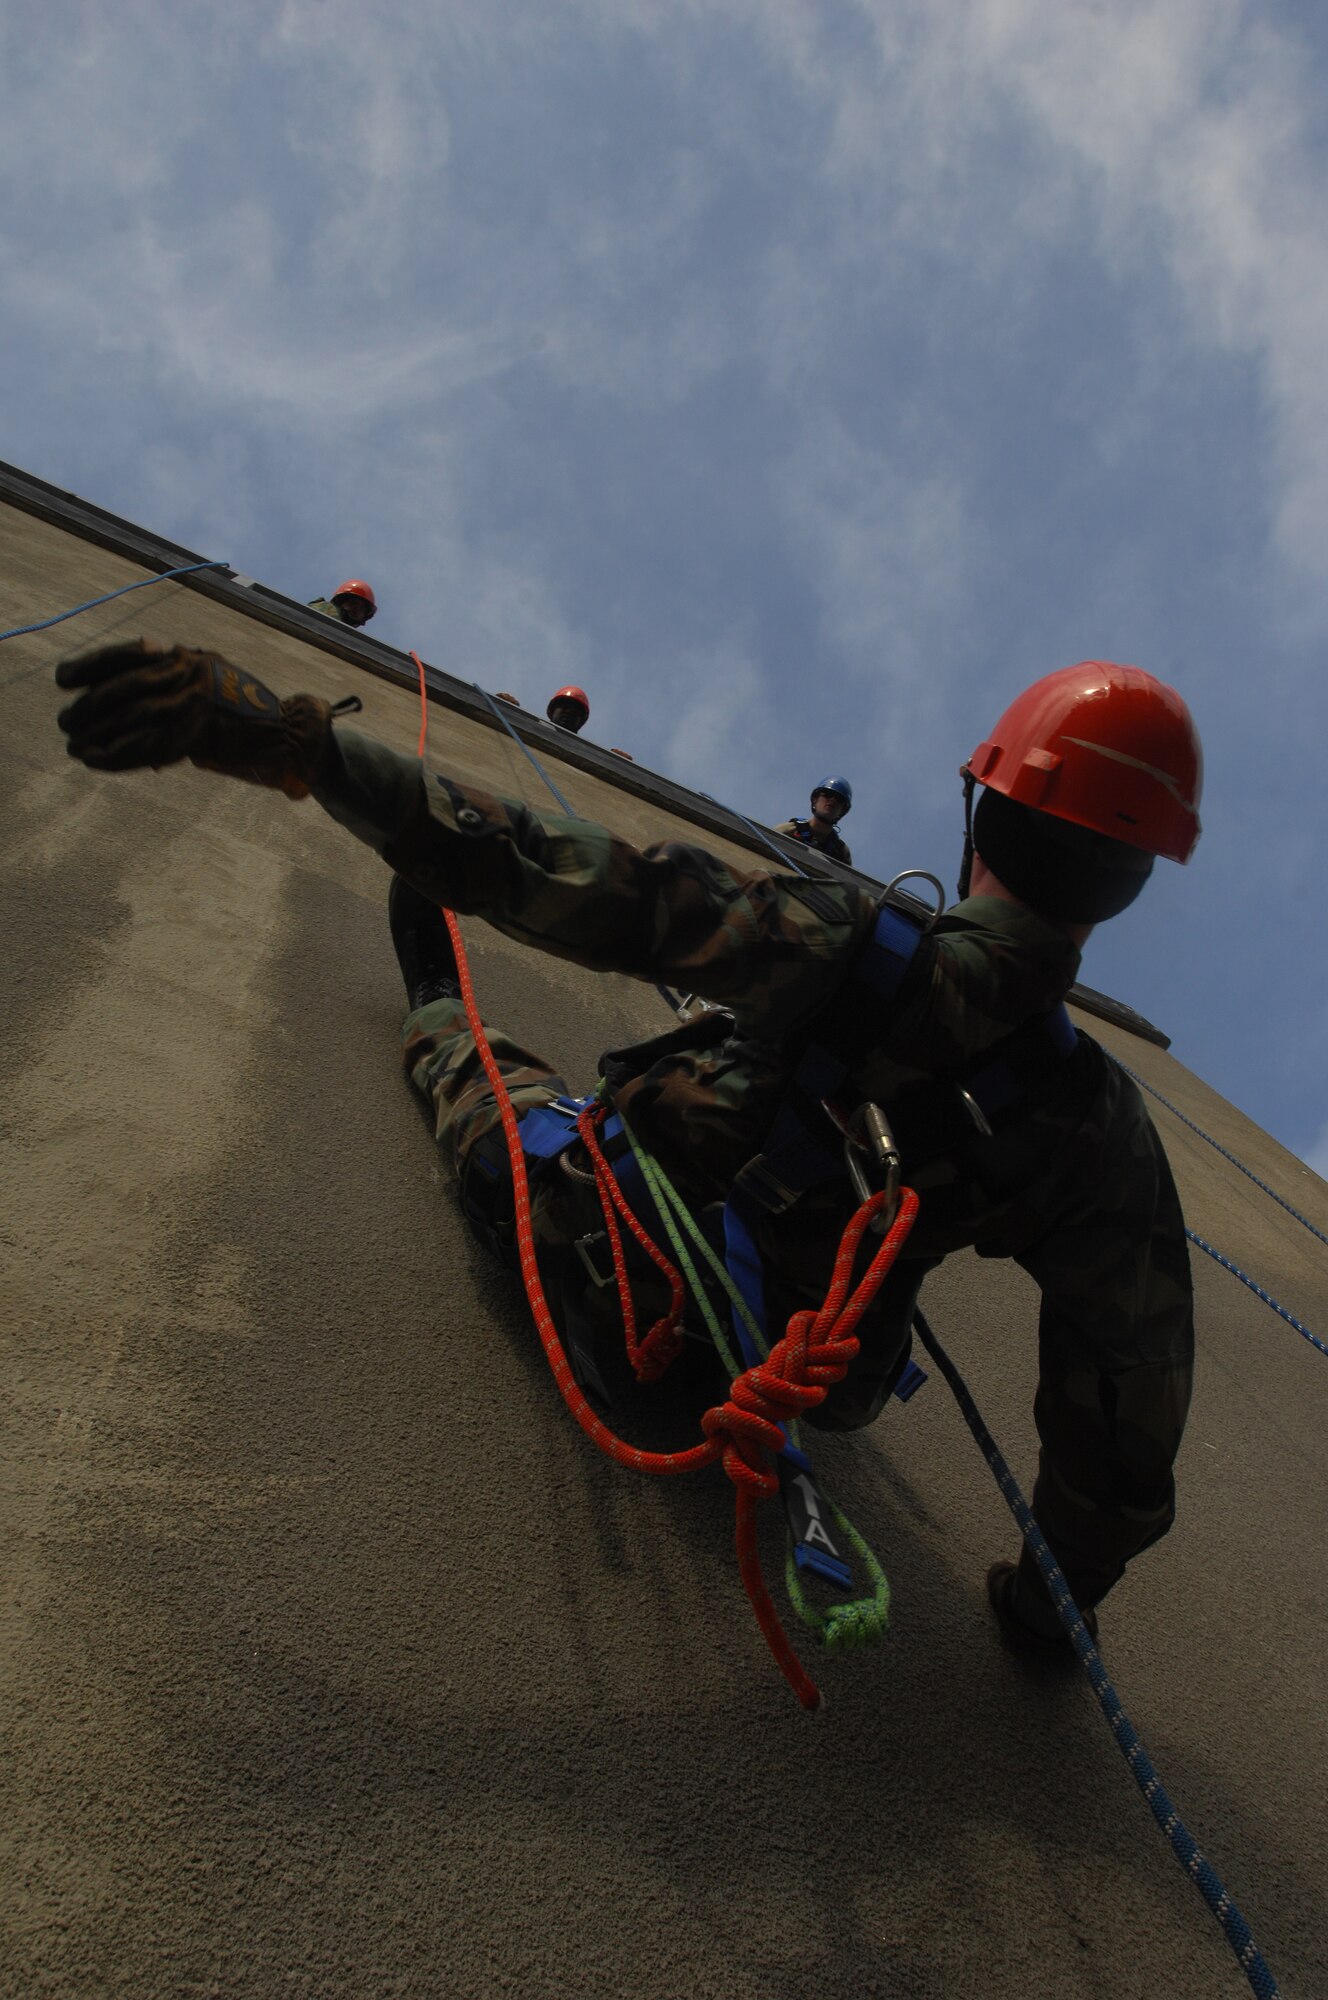 A U.S. Air Forces in Europe firefighter participates in rappelling training Feb. 3, 2009, at Ramstein Air Base. Several firefighters from all over USAFE gathered to participate in an extensive two-week training course. (U.S. Air Force photo by Airman 1st Class Kenny Holston)